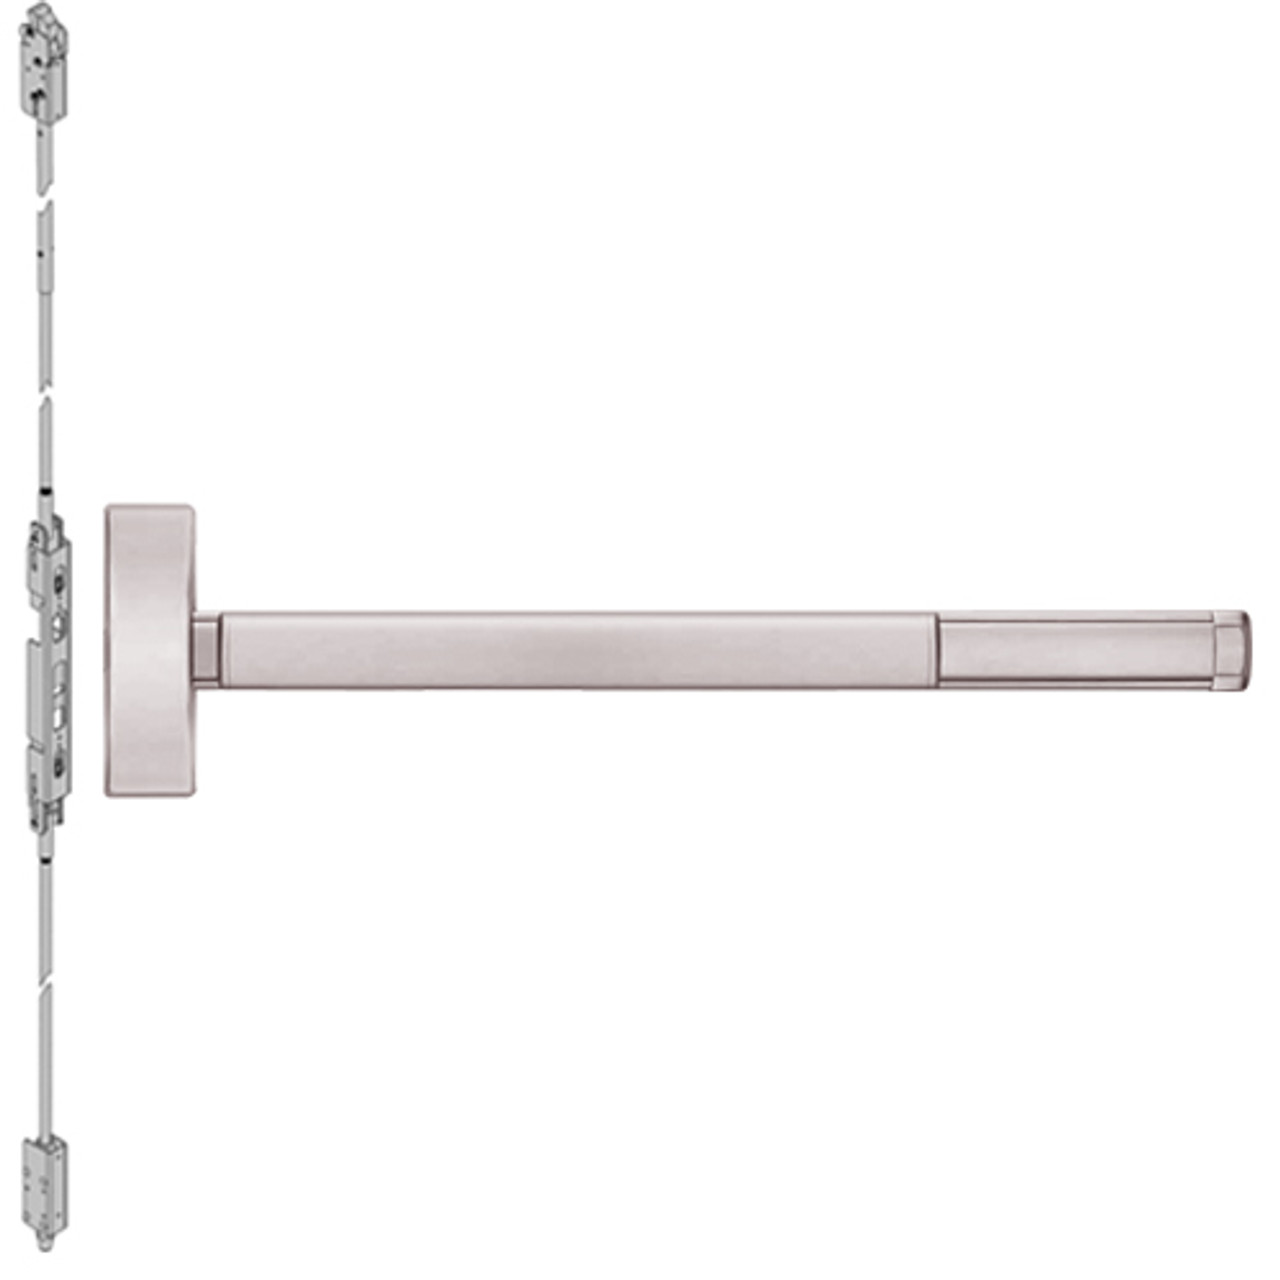 FL2801LBR-628-36 PHI 2800 Series Fire Rated Concealed Vertical Rod Exit Device Prepped for Cover Plate in Satin Aluminum Finish